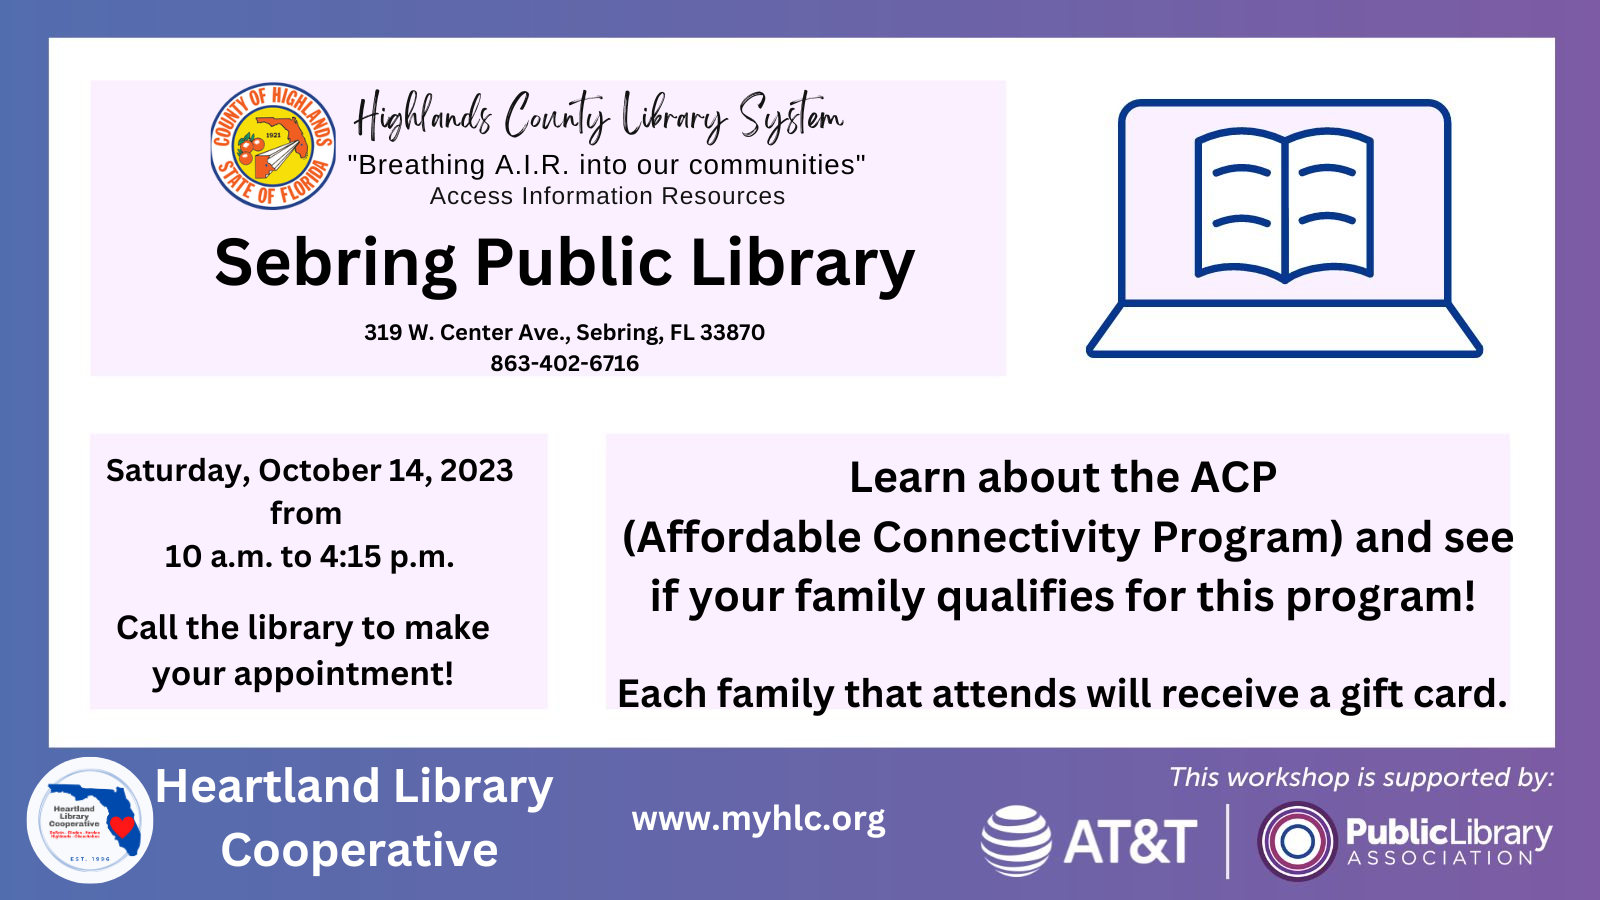 If you would like assistance in applying for the ACP or Affordable Connectivity Program, schedule an appointment with the Sebring Public Library on Saturday, October 14, 2023 between 10 a.m. and 4:15 p.m. by calling 863-402-6716 or filling out the form in this link (click here). More information about the ACP below.